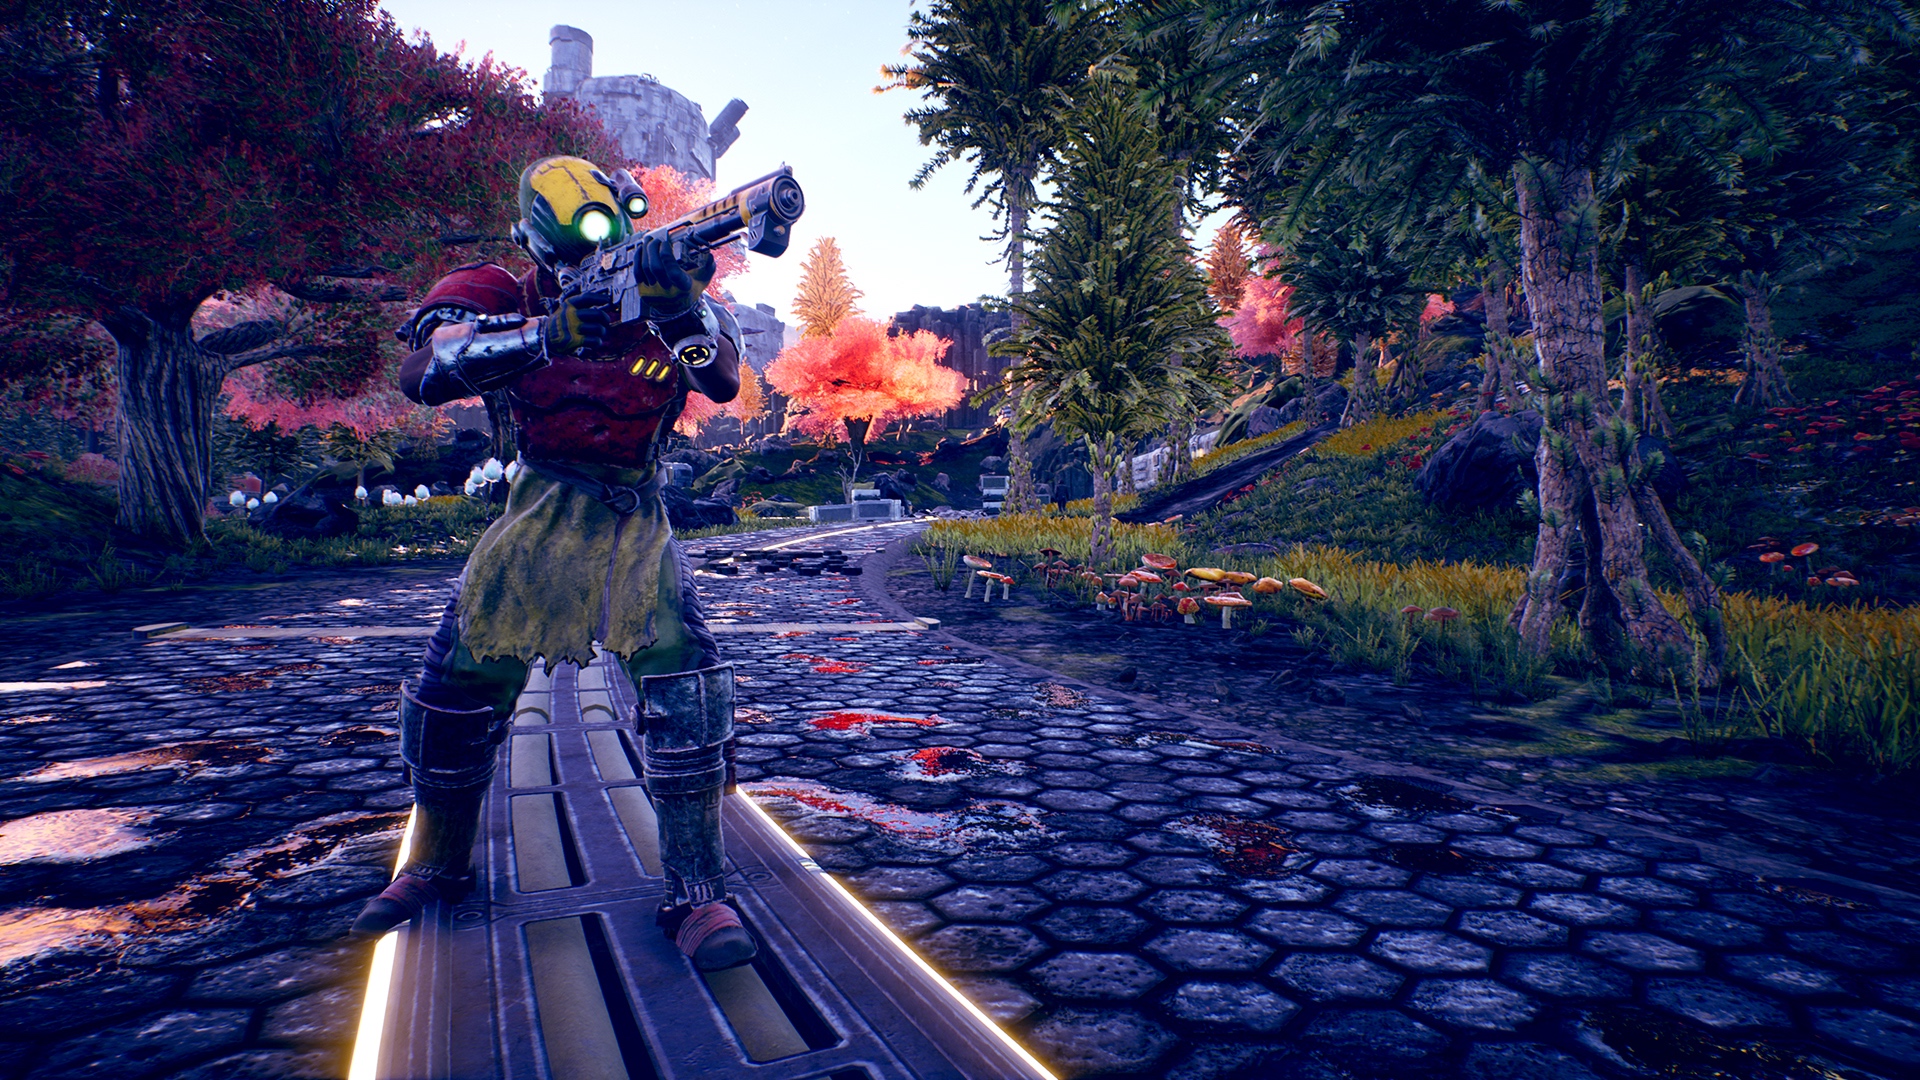 outer worlds for switch